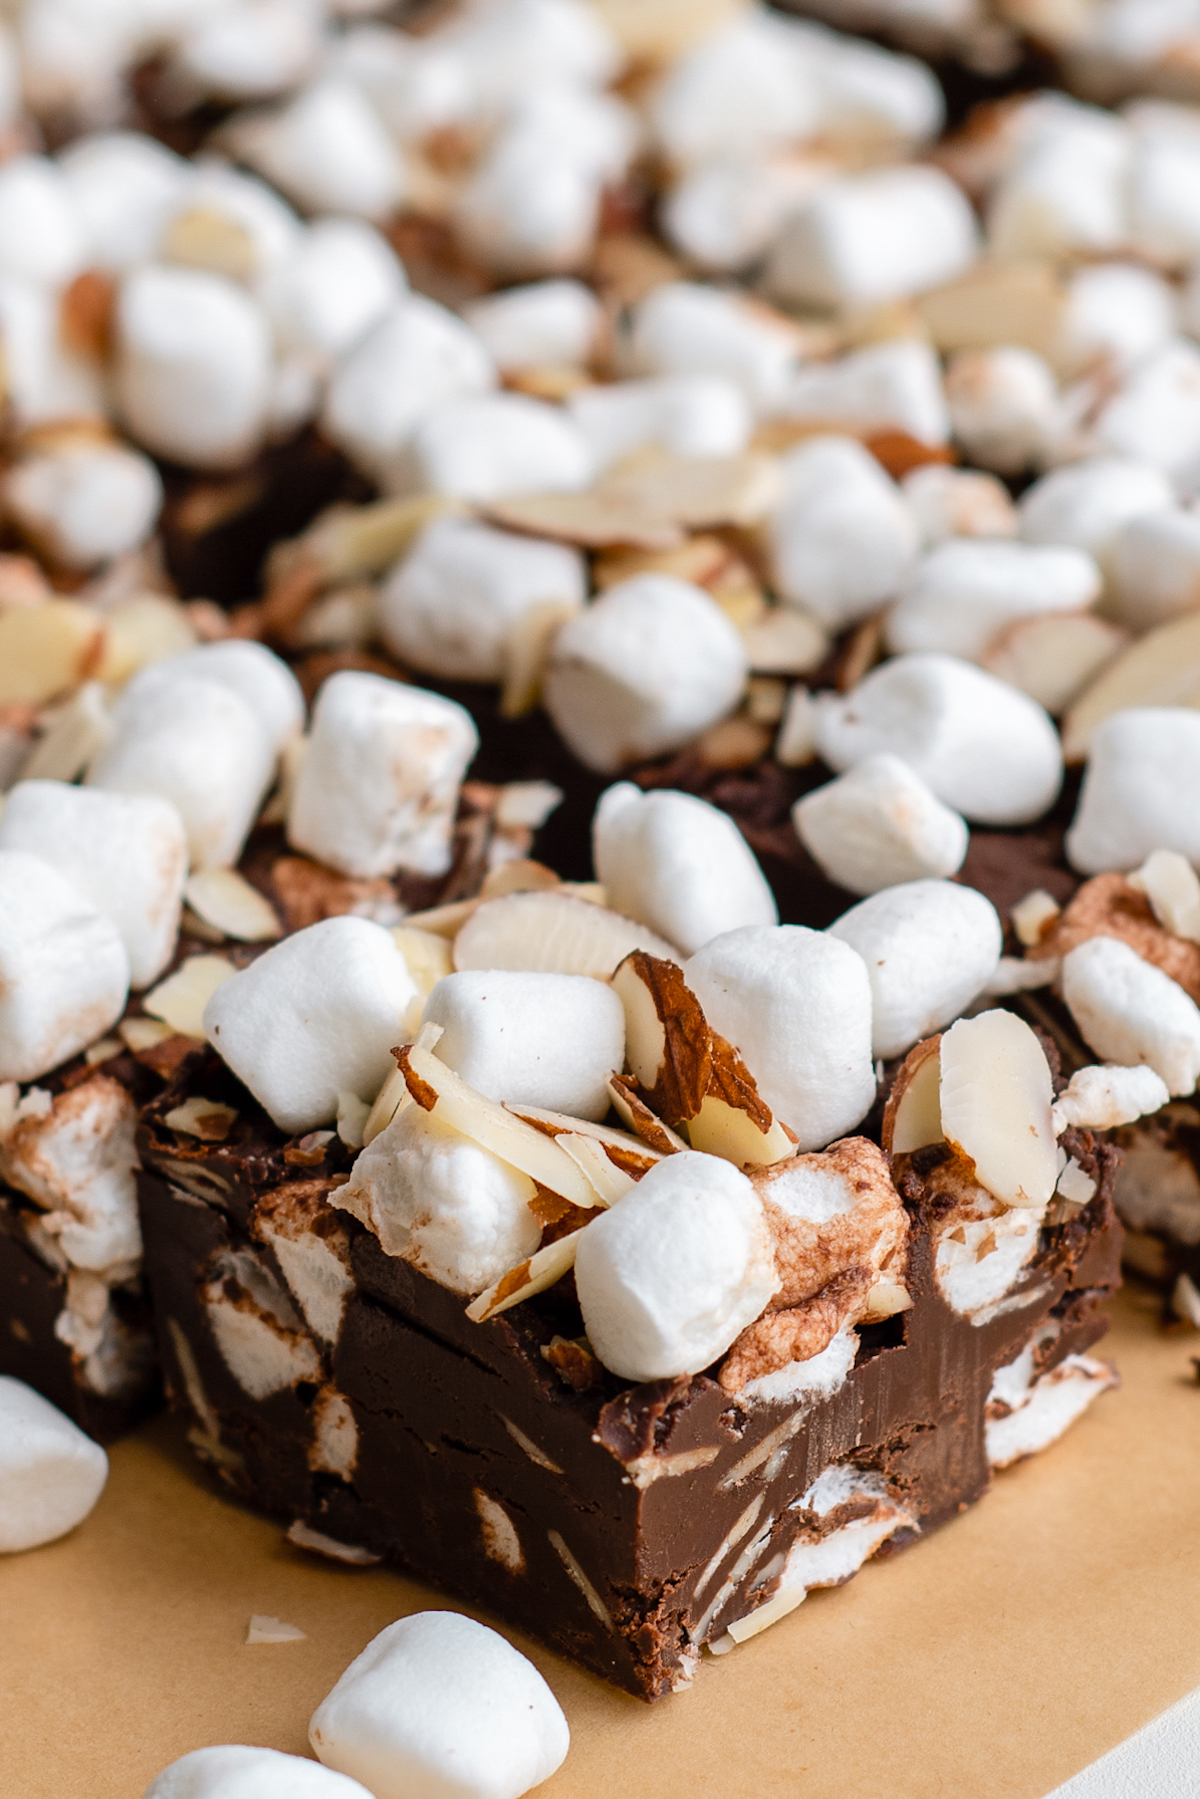 Close-up side view of rocky road fudge, showing the texture of the toppings and fudge.